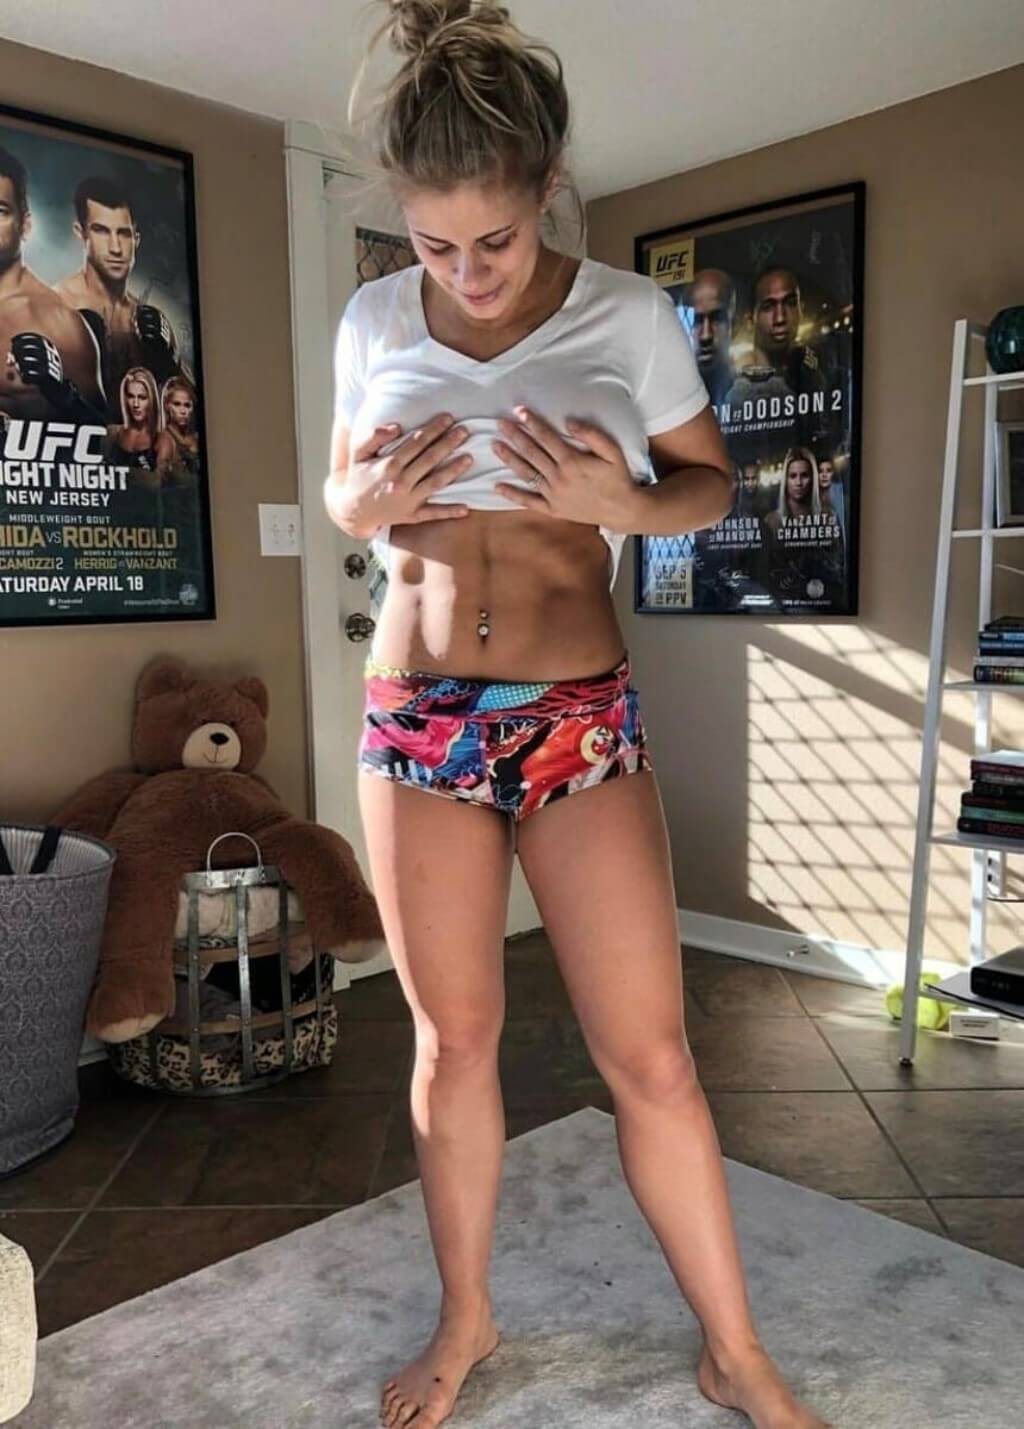 Ufc women fighters nude Pic: UFC